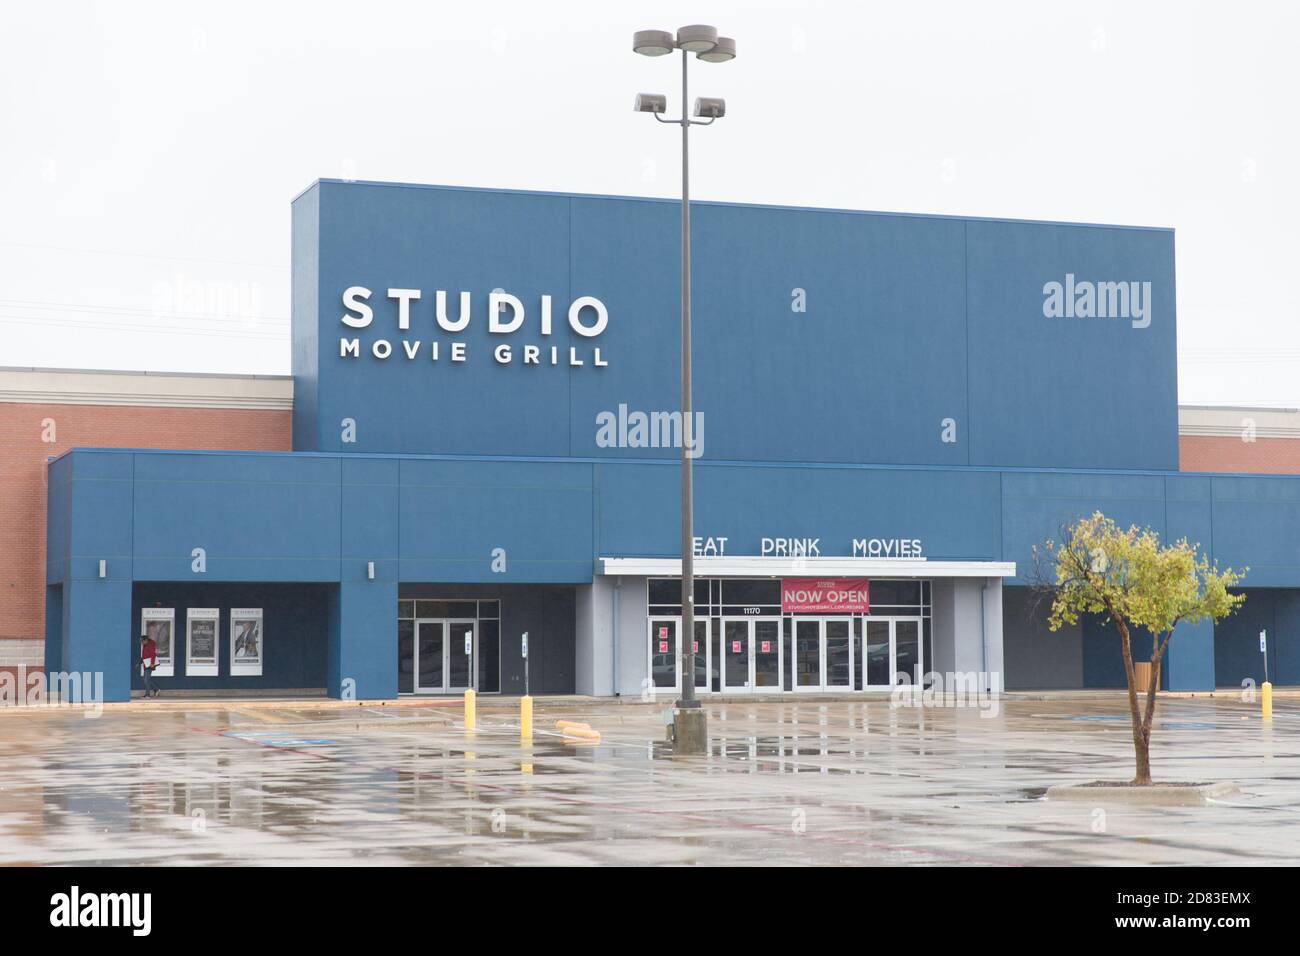 Dallas, USA. 26th Oct, 2020. A Studio Movie Grill is seen in Dallas, Texas, the United States, on Oct. 26, 2020. U.S. dine-in movie theater chain, Studio Movie Grill, has filed for Chapter 11 bankruptcy protection last Friday after the COVID-19 epidemic kept audiences away. Credit: Dan Tian/Xinhua/Alamy Live News Stock Photo